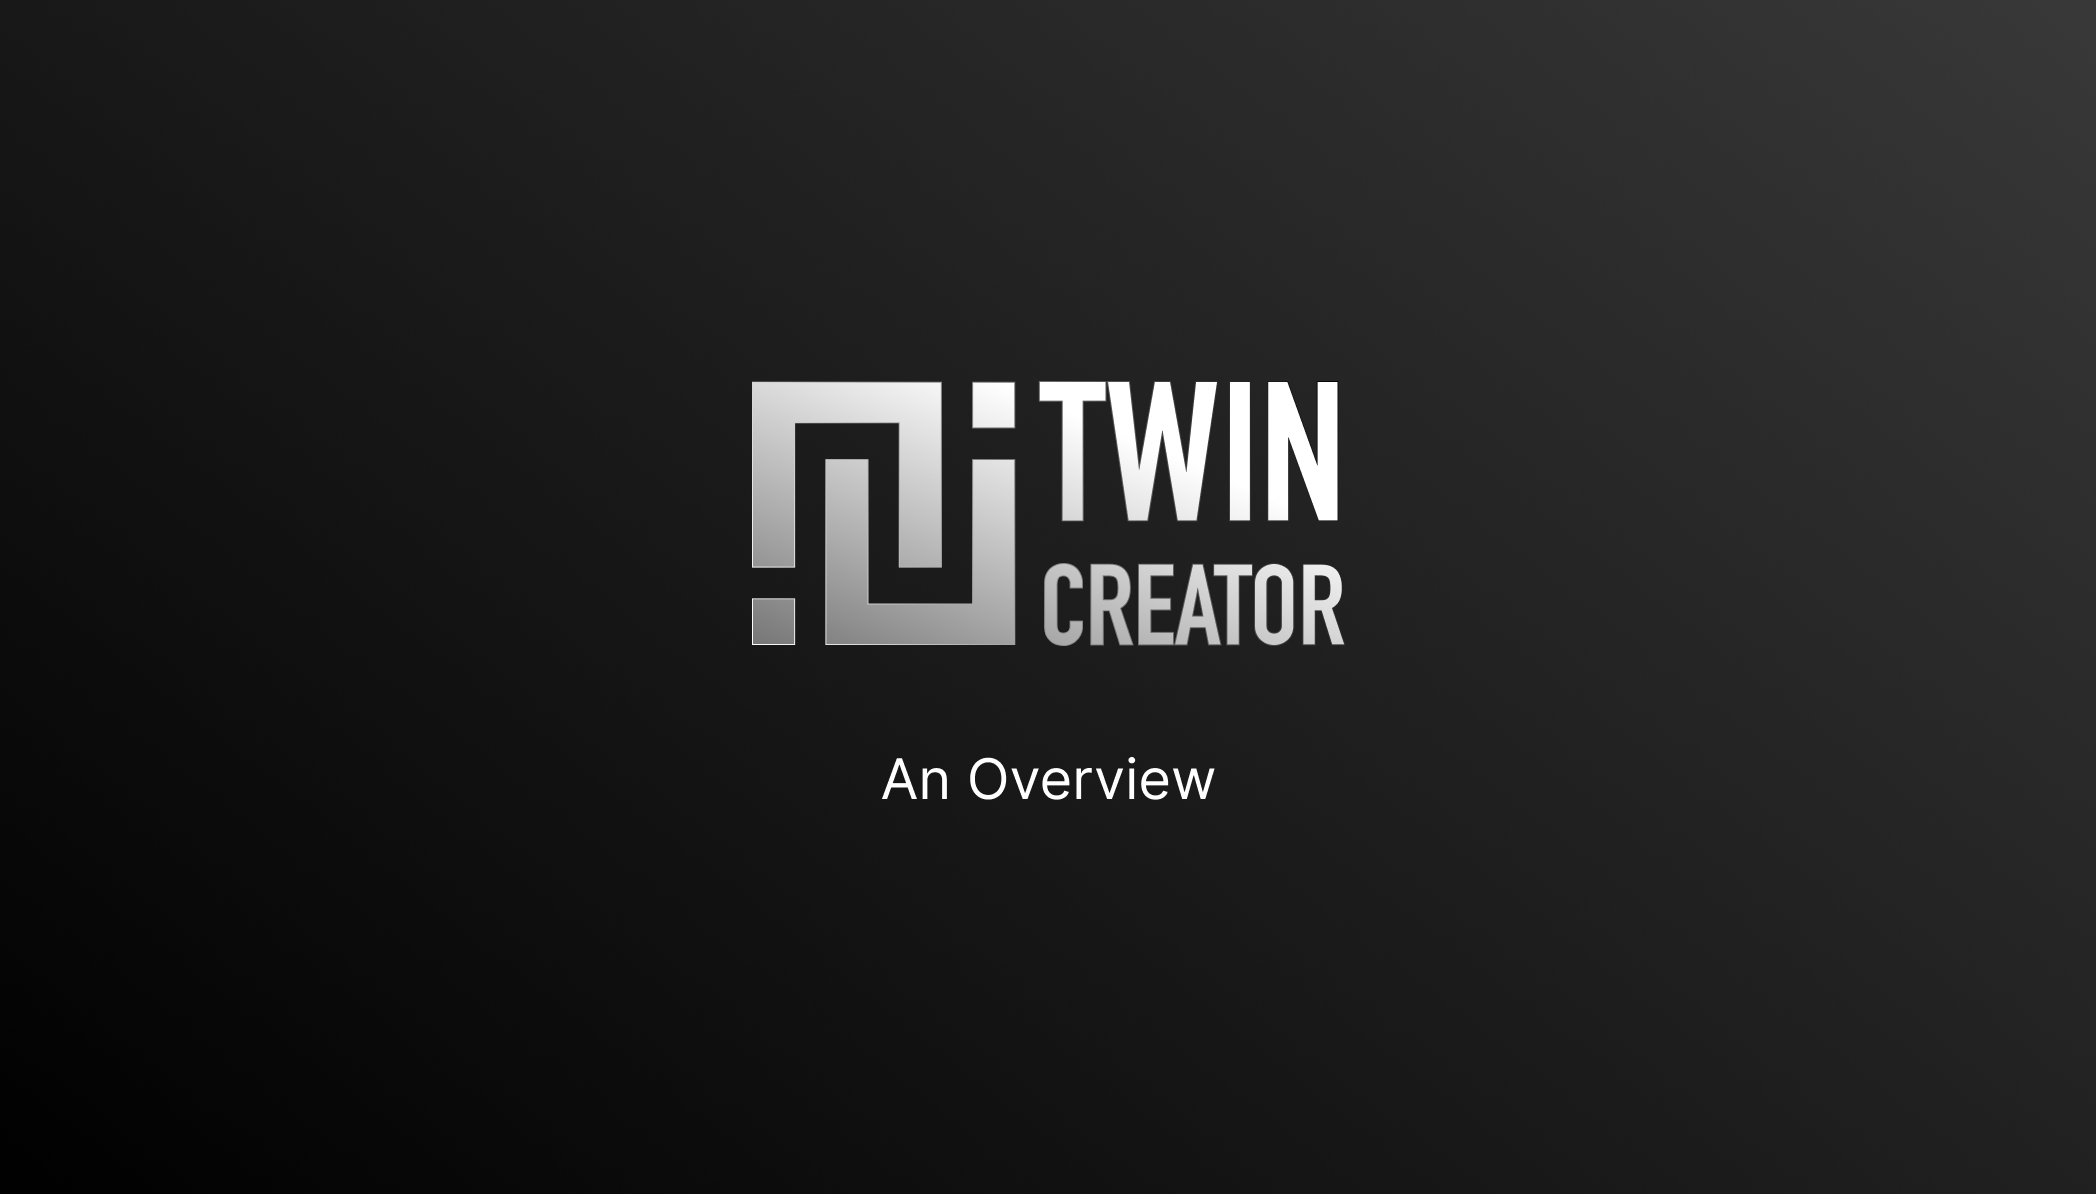 TwinCreator: An Overview